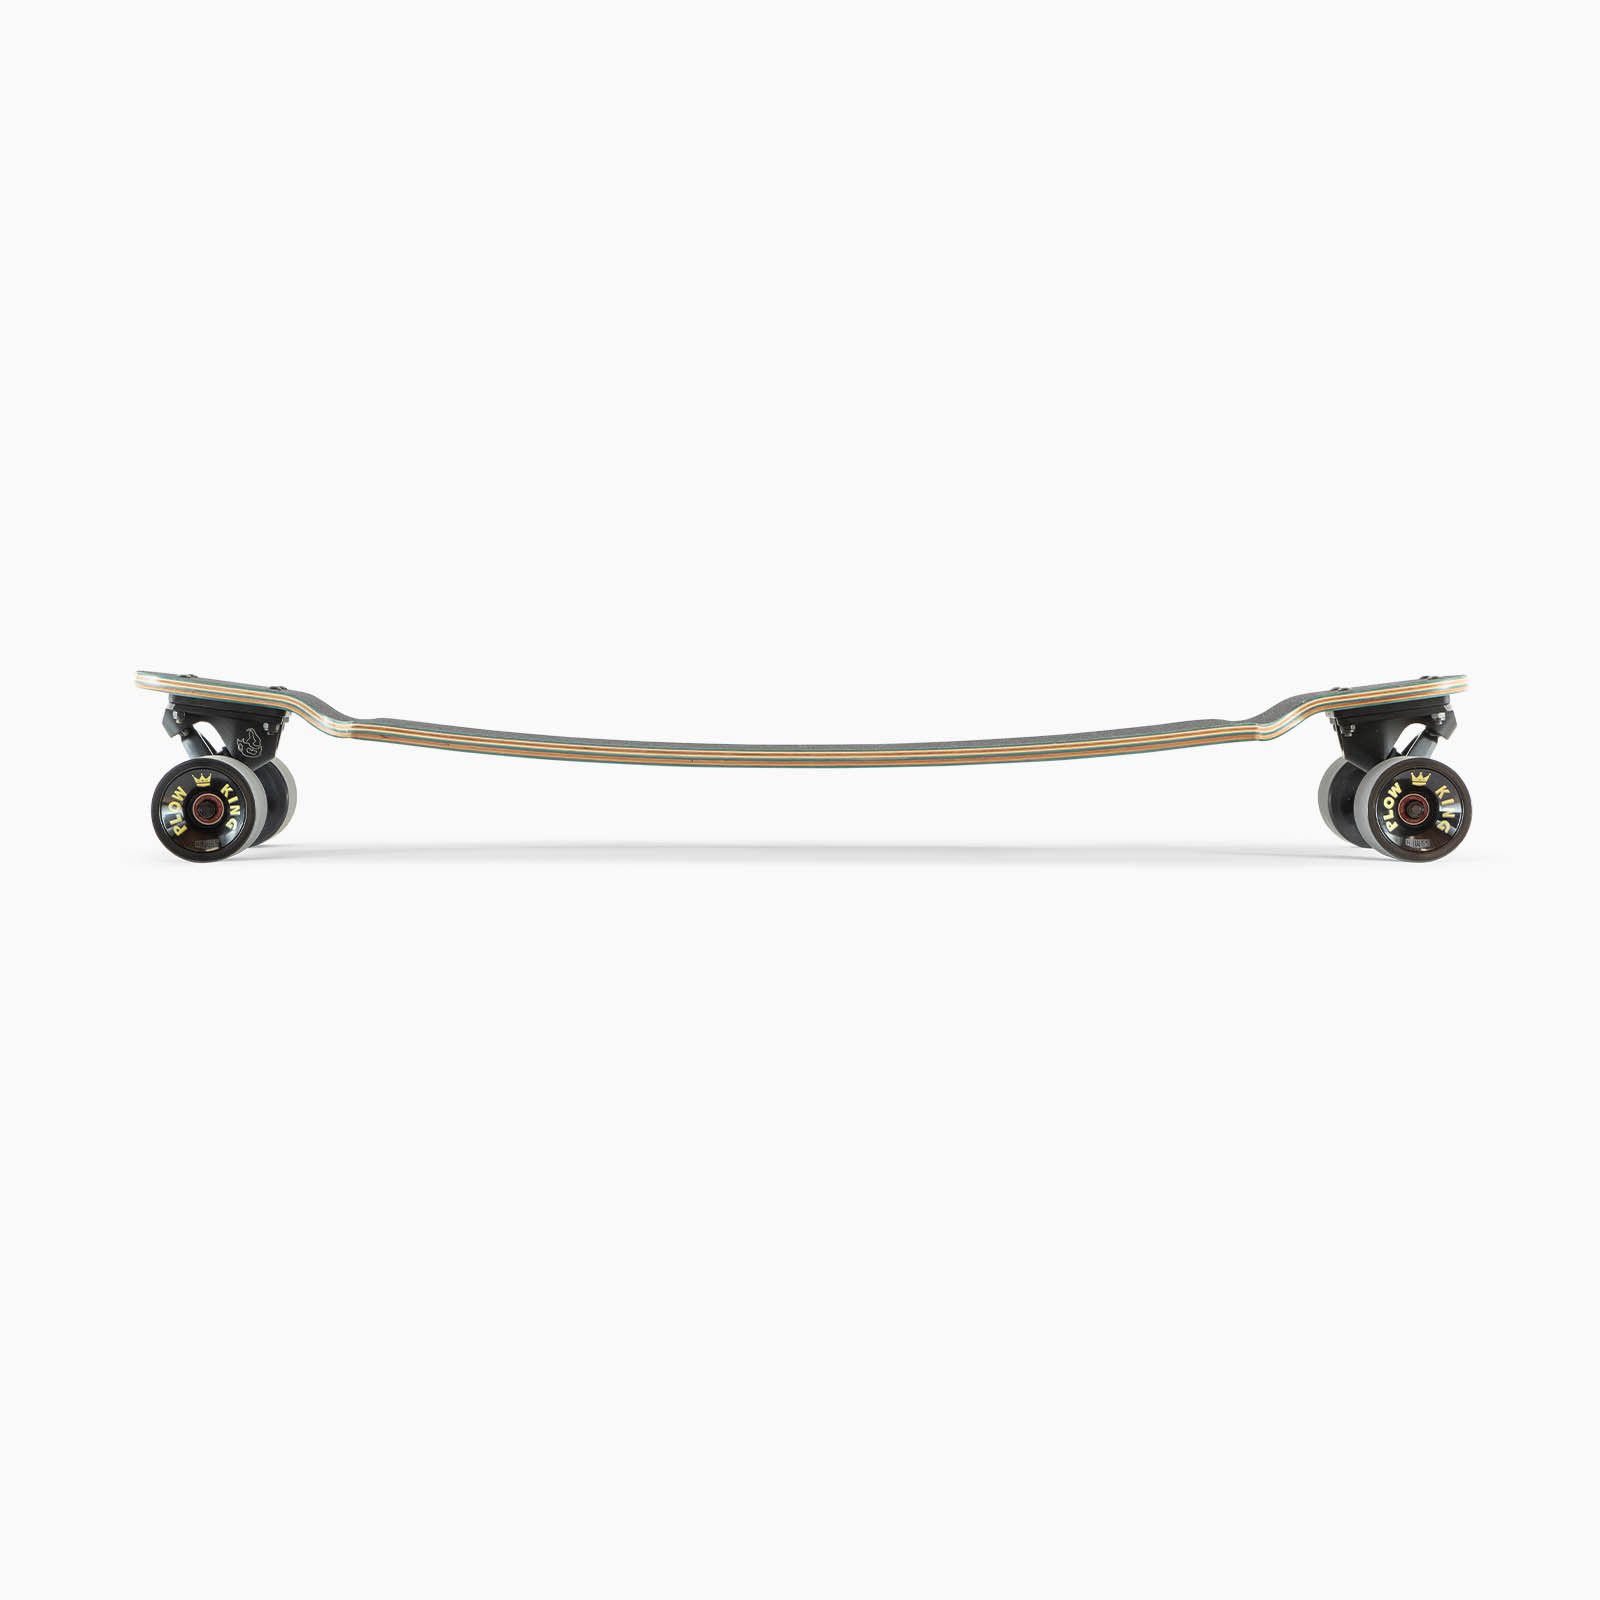 Skateboard complet - top Cat 37 Palm 37 X 9.9 Wb 29.2